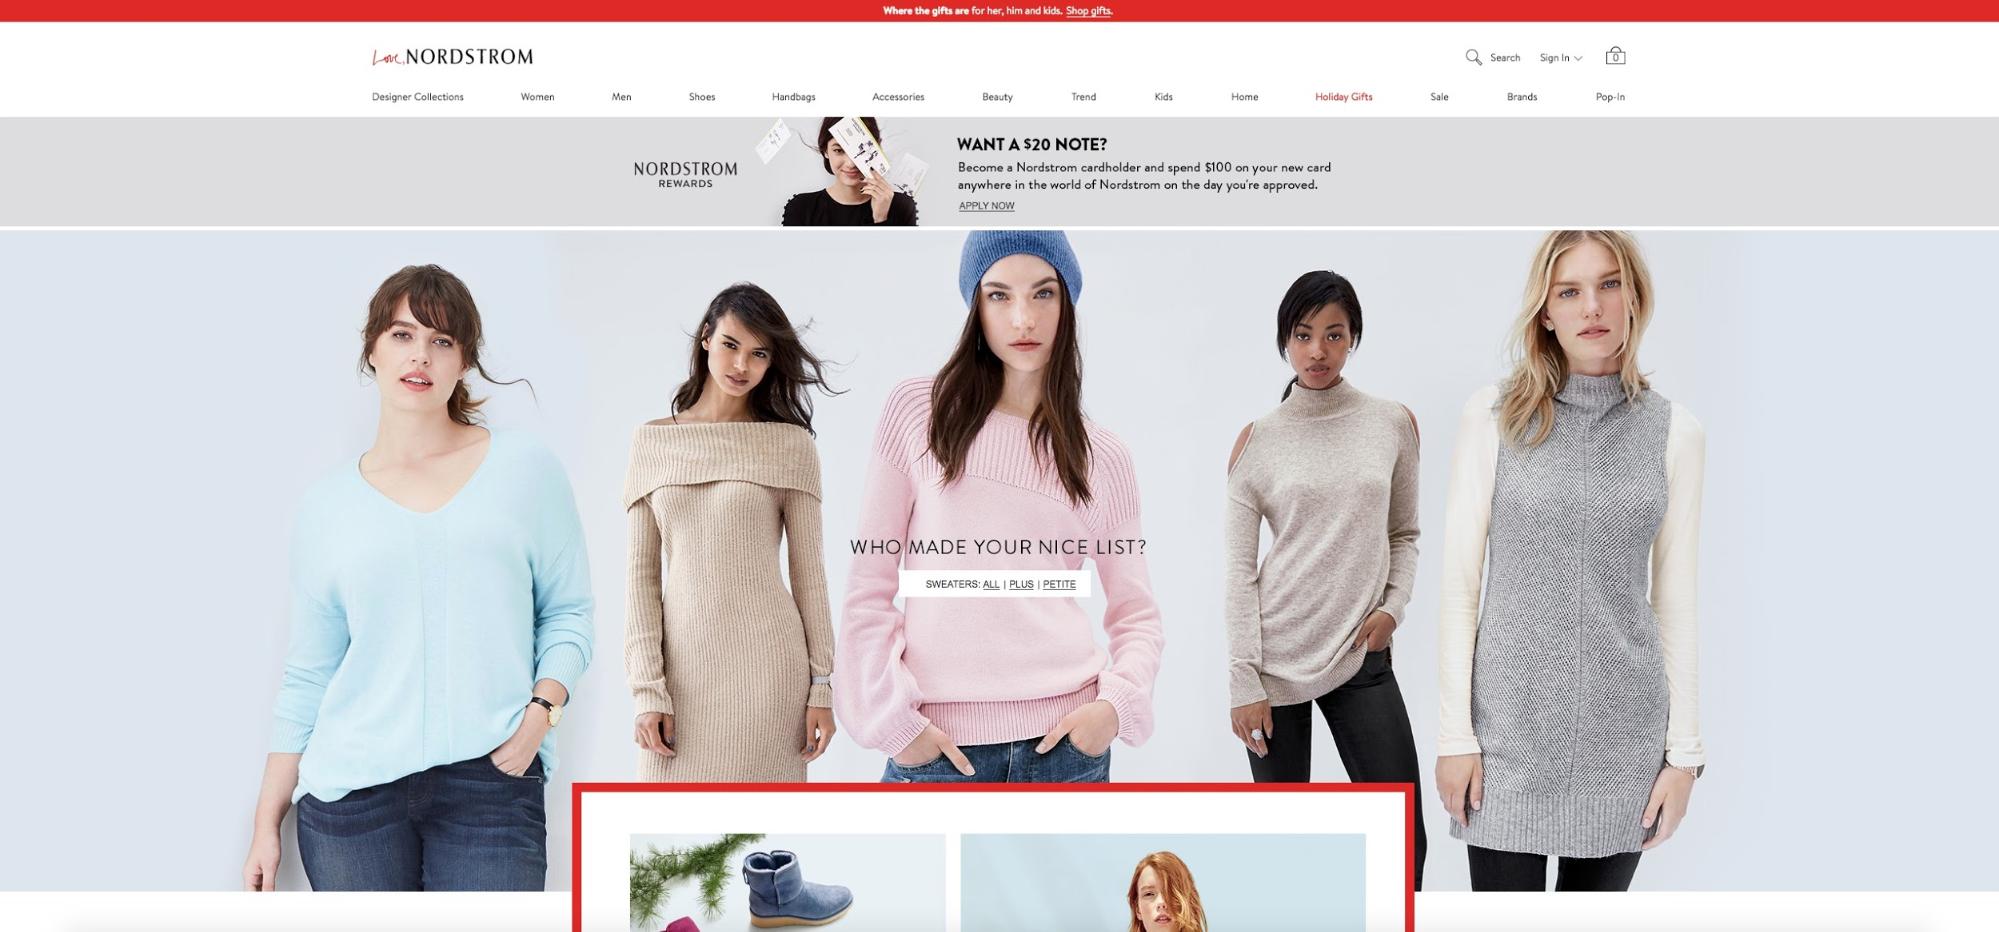 10 Effective eCommerce Holiday Page Designs - Pixc